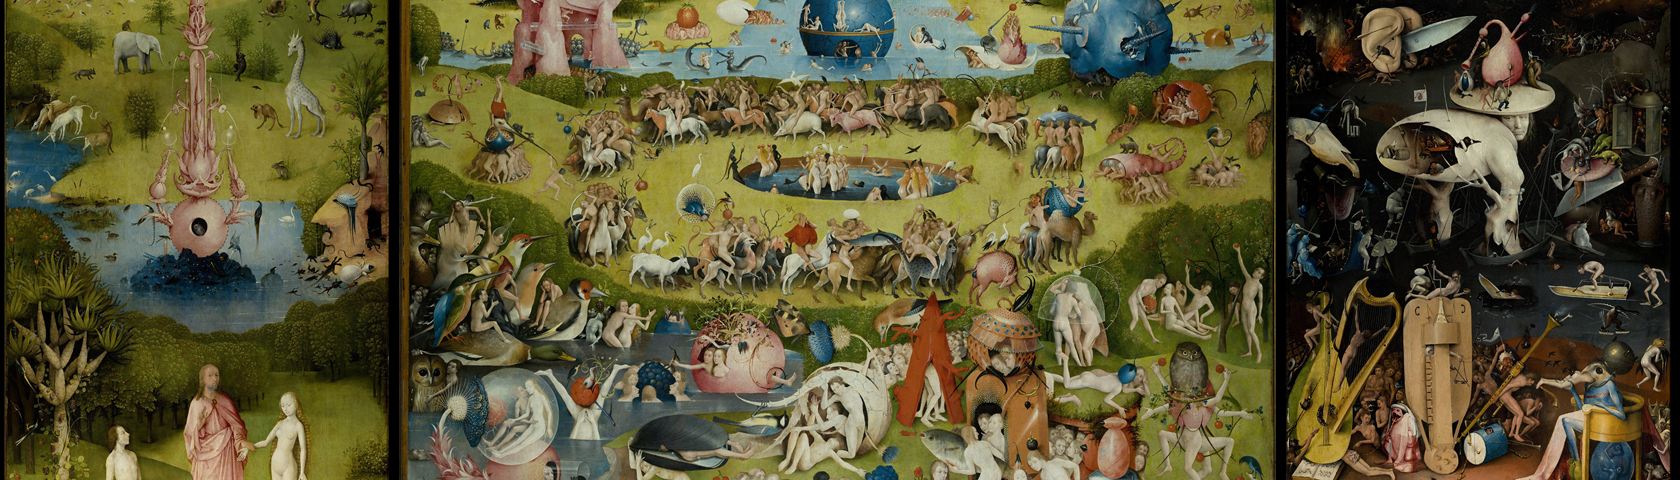 The Garden Of Earthly Delights - Garden Of Earthly Delights , HD Wallpaper & Backgrounds